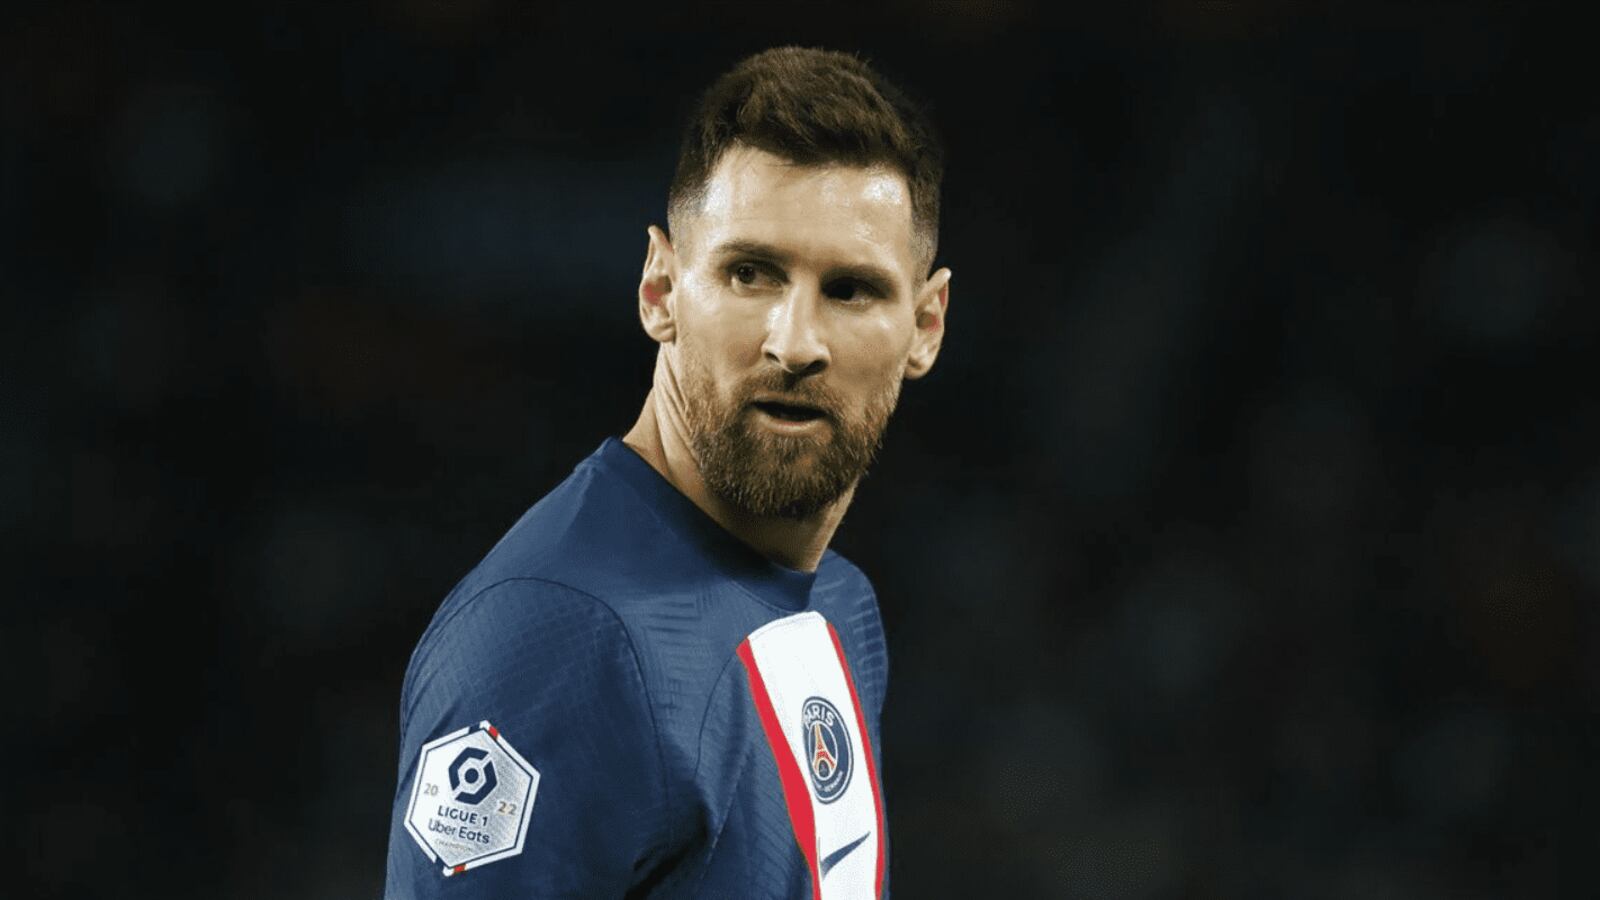 While PSG fans don't want to see Messi, the European giant that's angry with Lionel